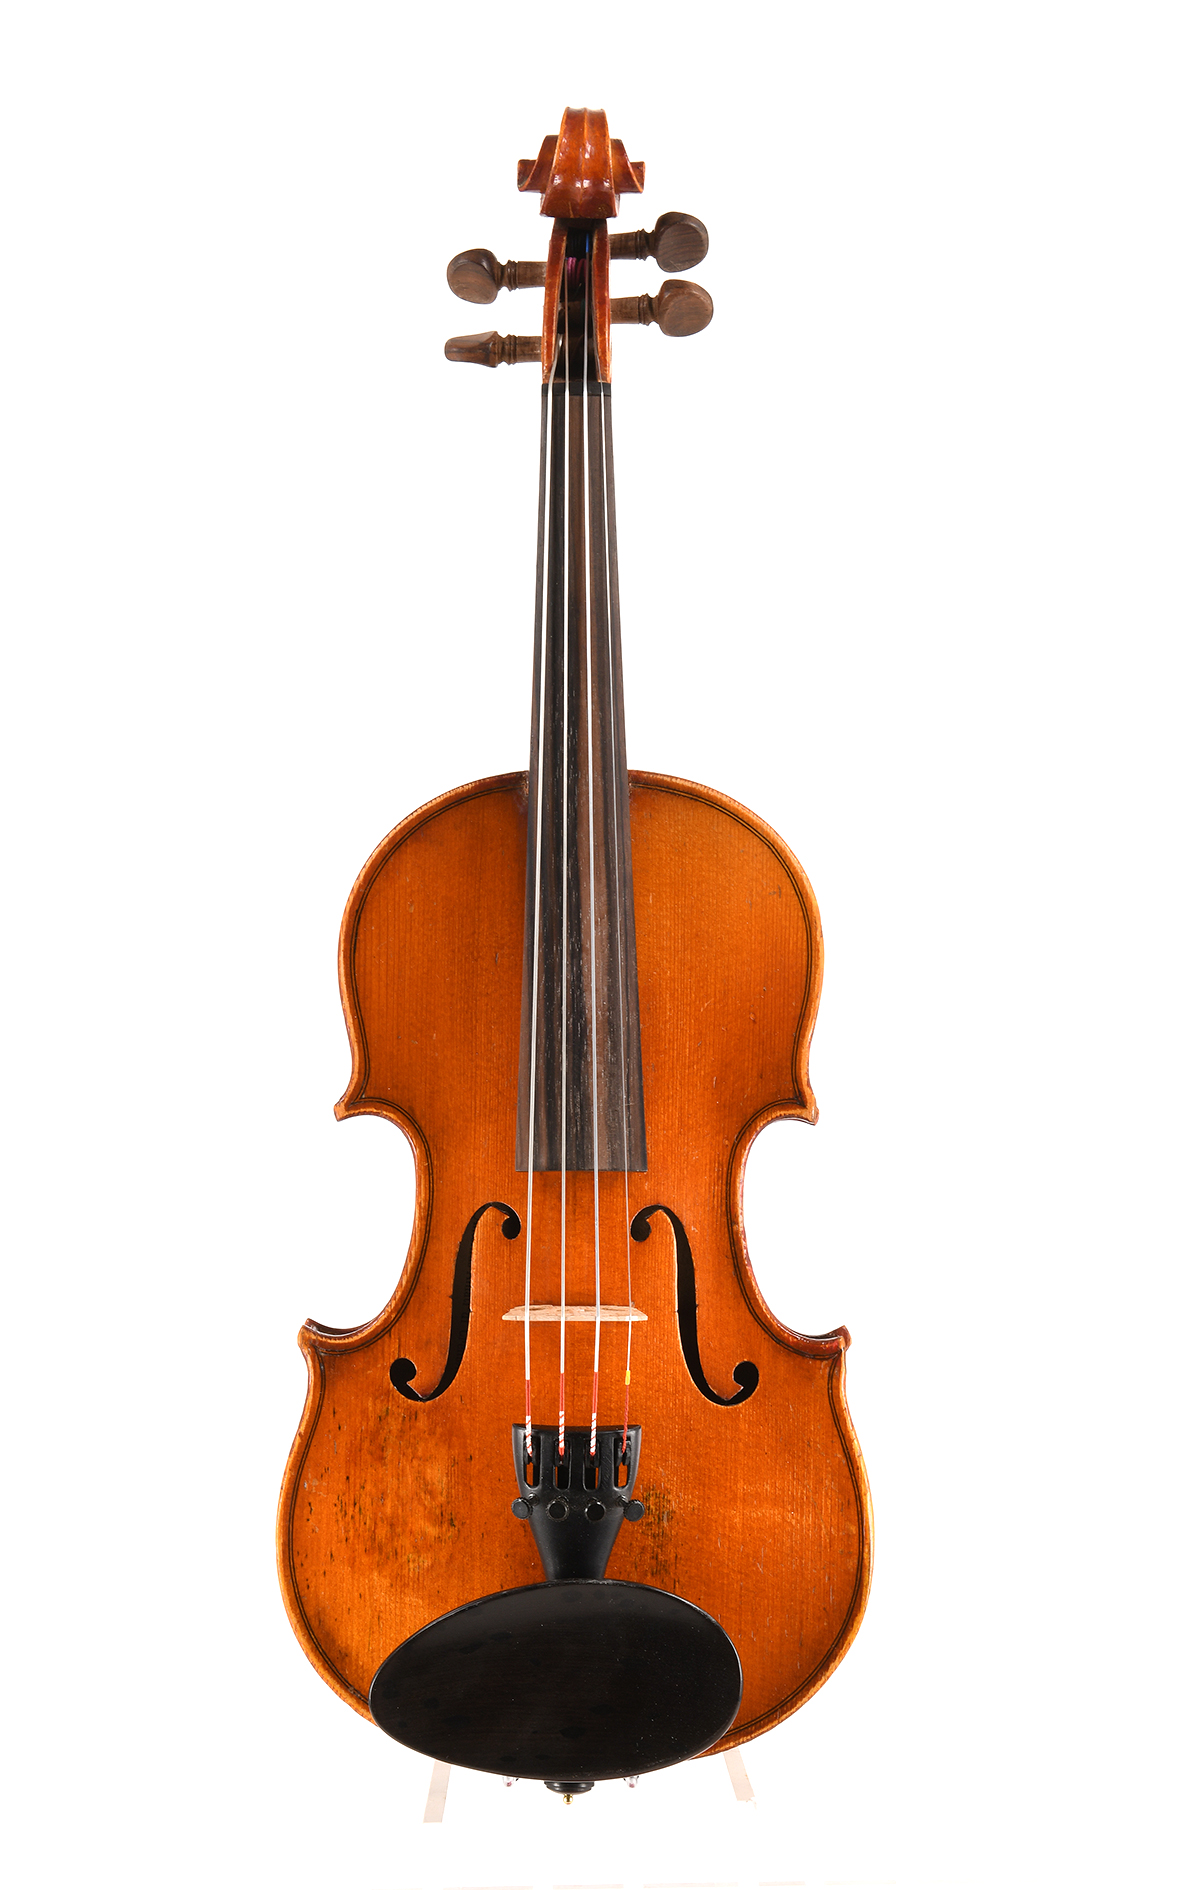 Antique French 1/4 violin, approx. 1900